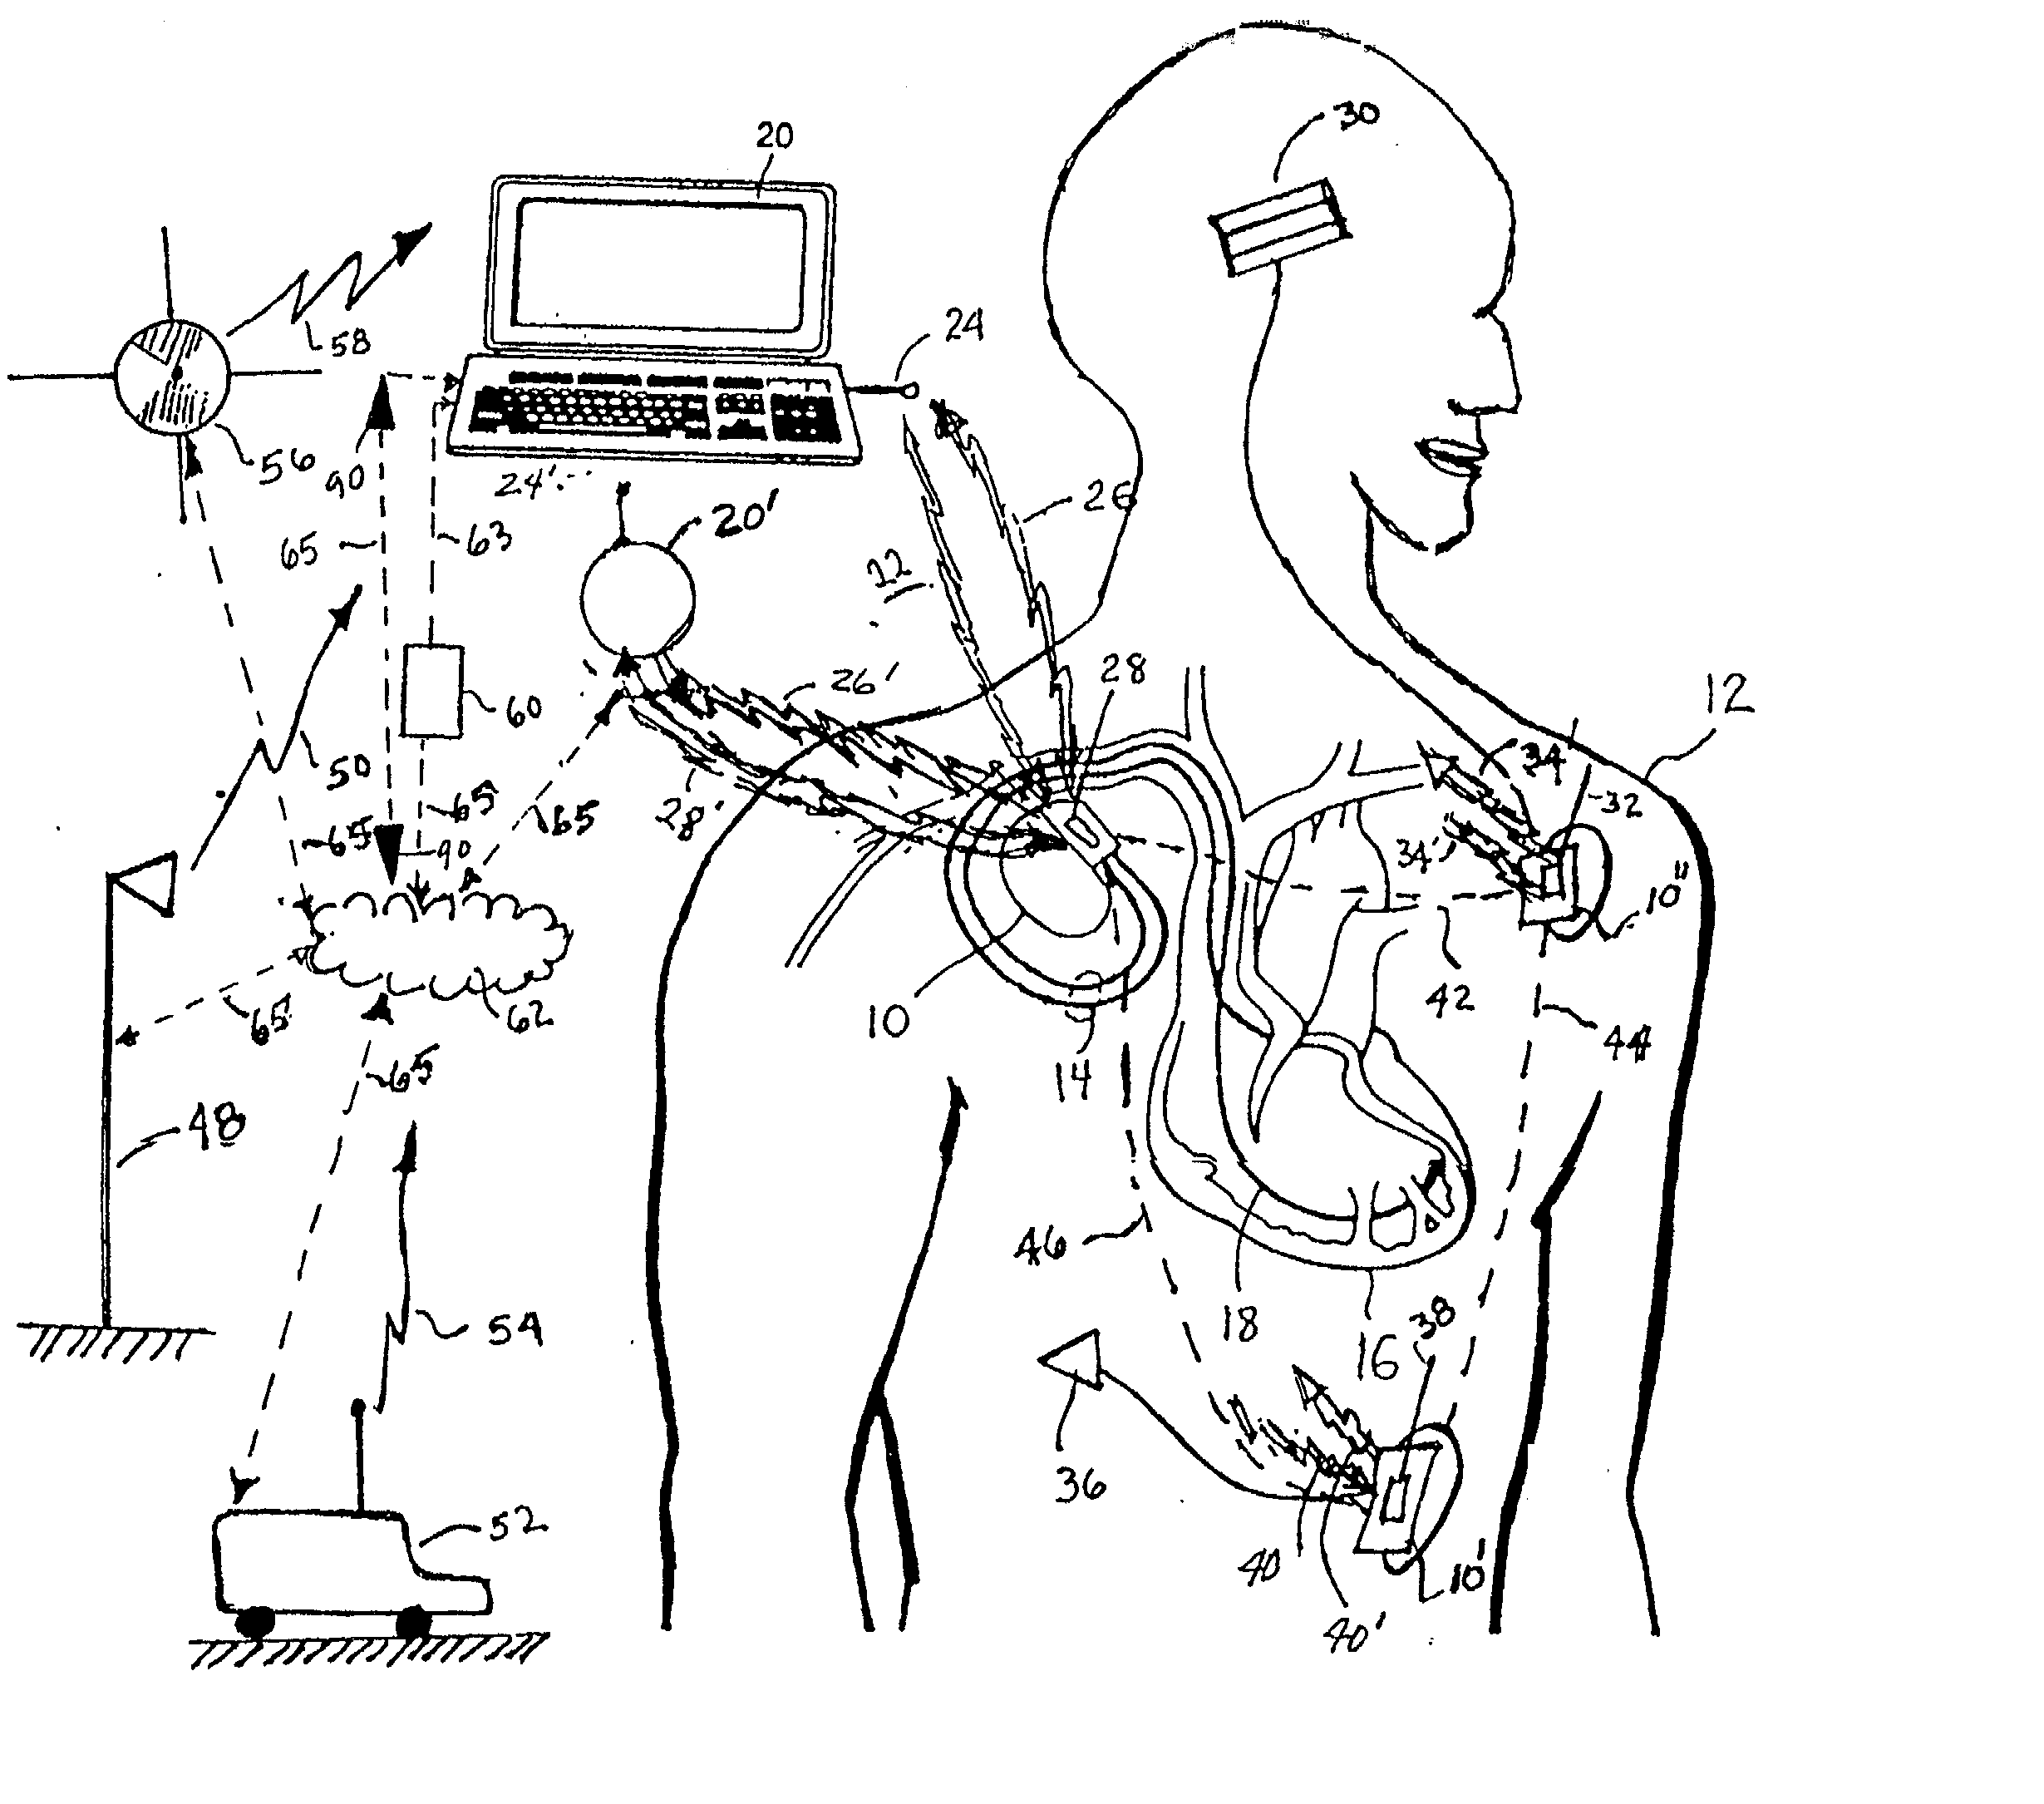 Method and apparatus for remotely programming implantable medical devices